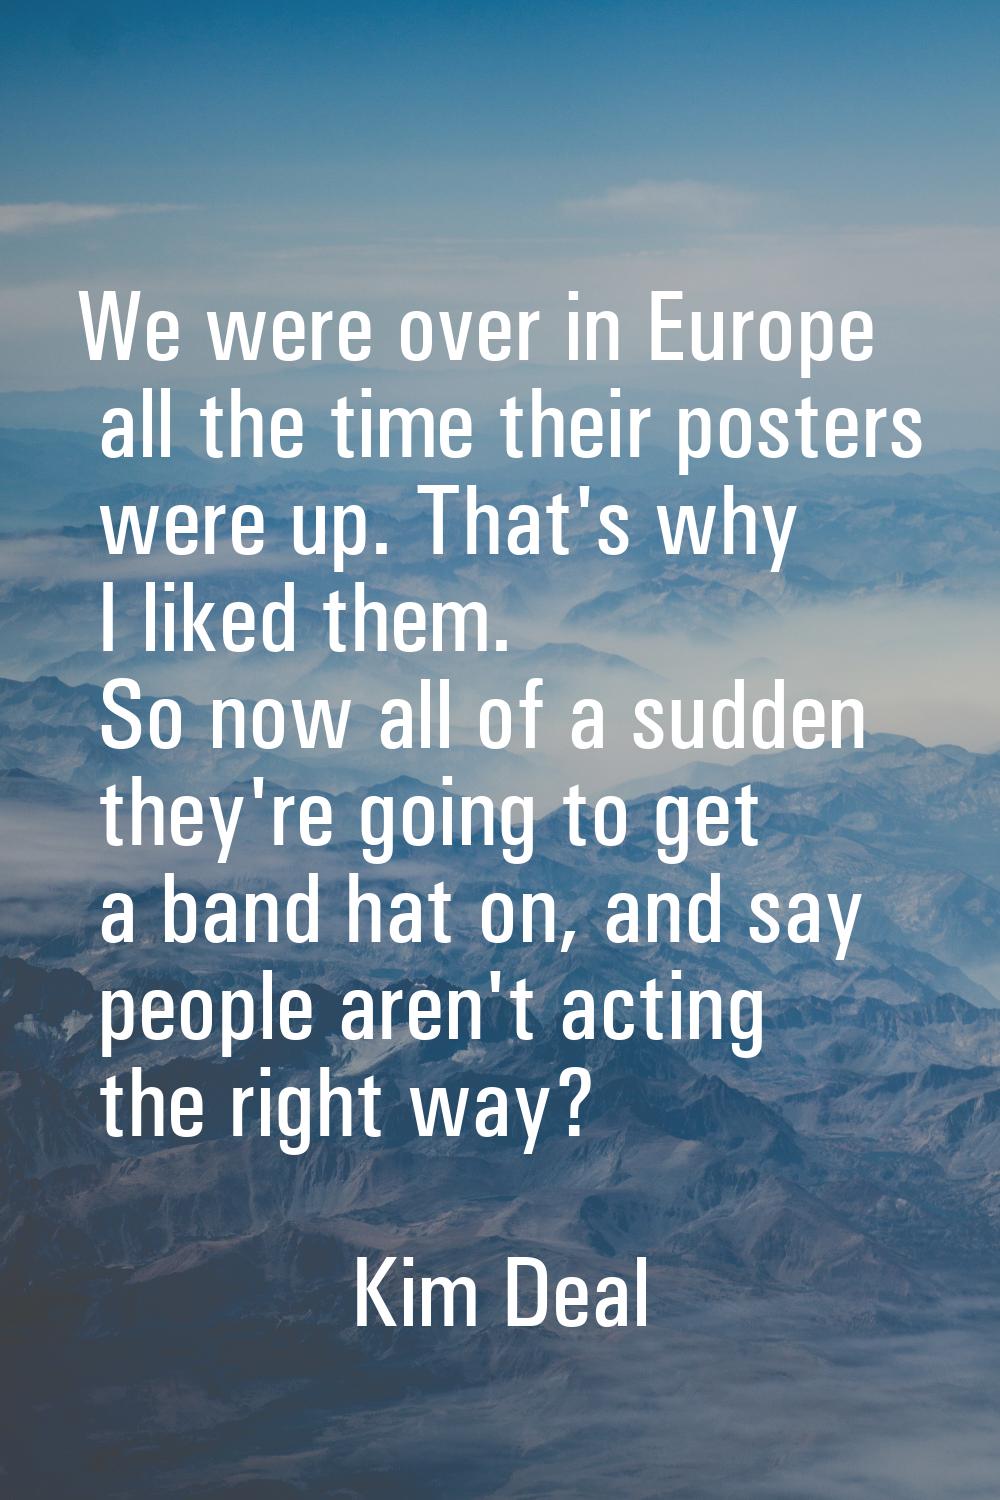 We were over in Europe all the time their posters were up. That's why I liked them. So now all of a